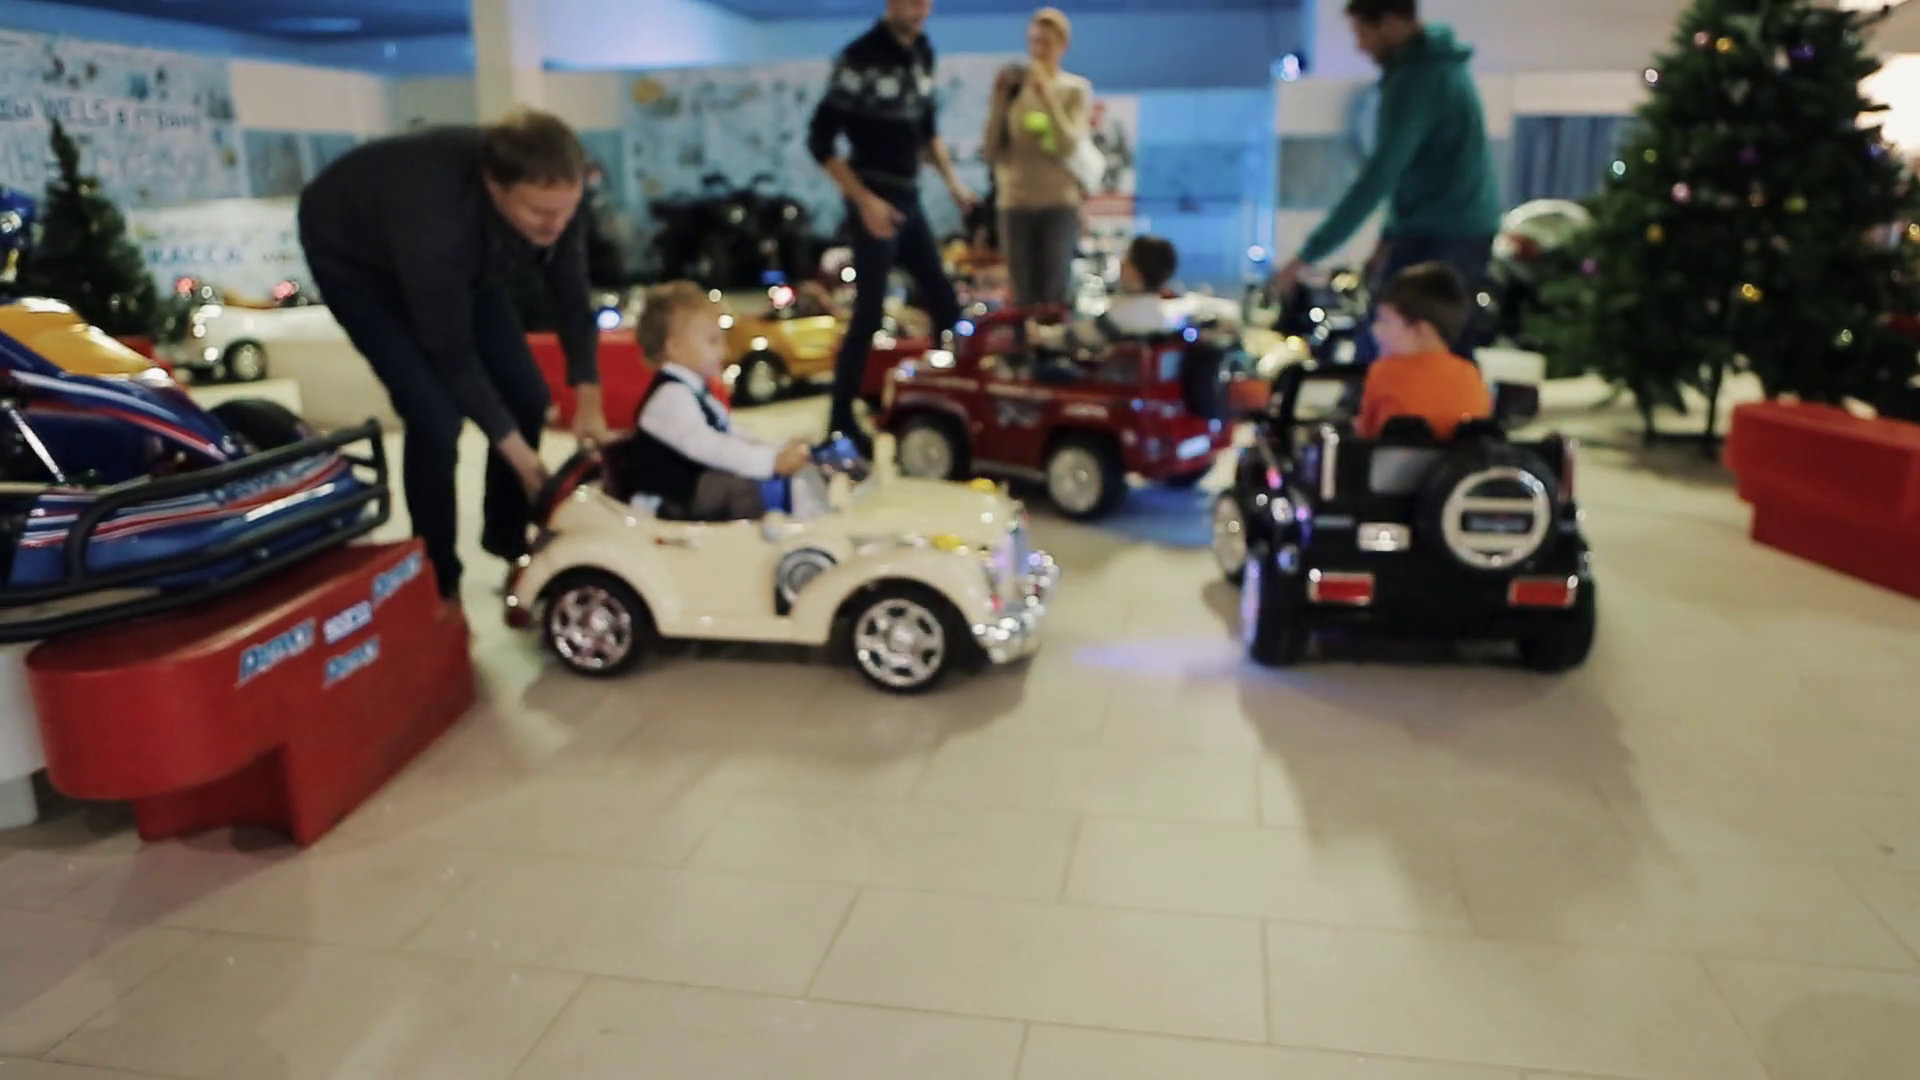 Children riding Battery Operated kids Cars inside shopping mall at ...